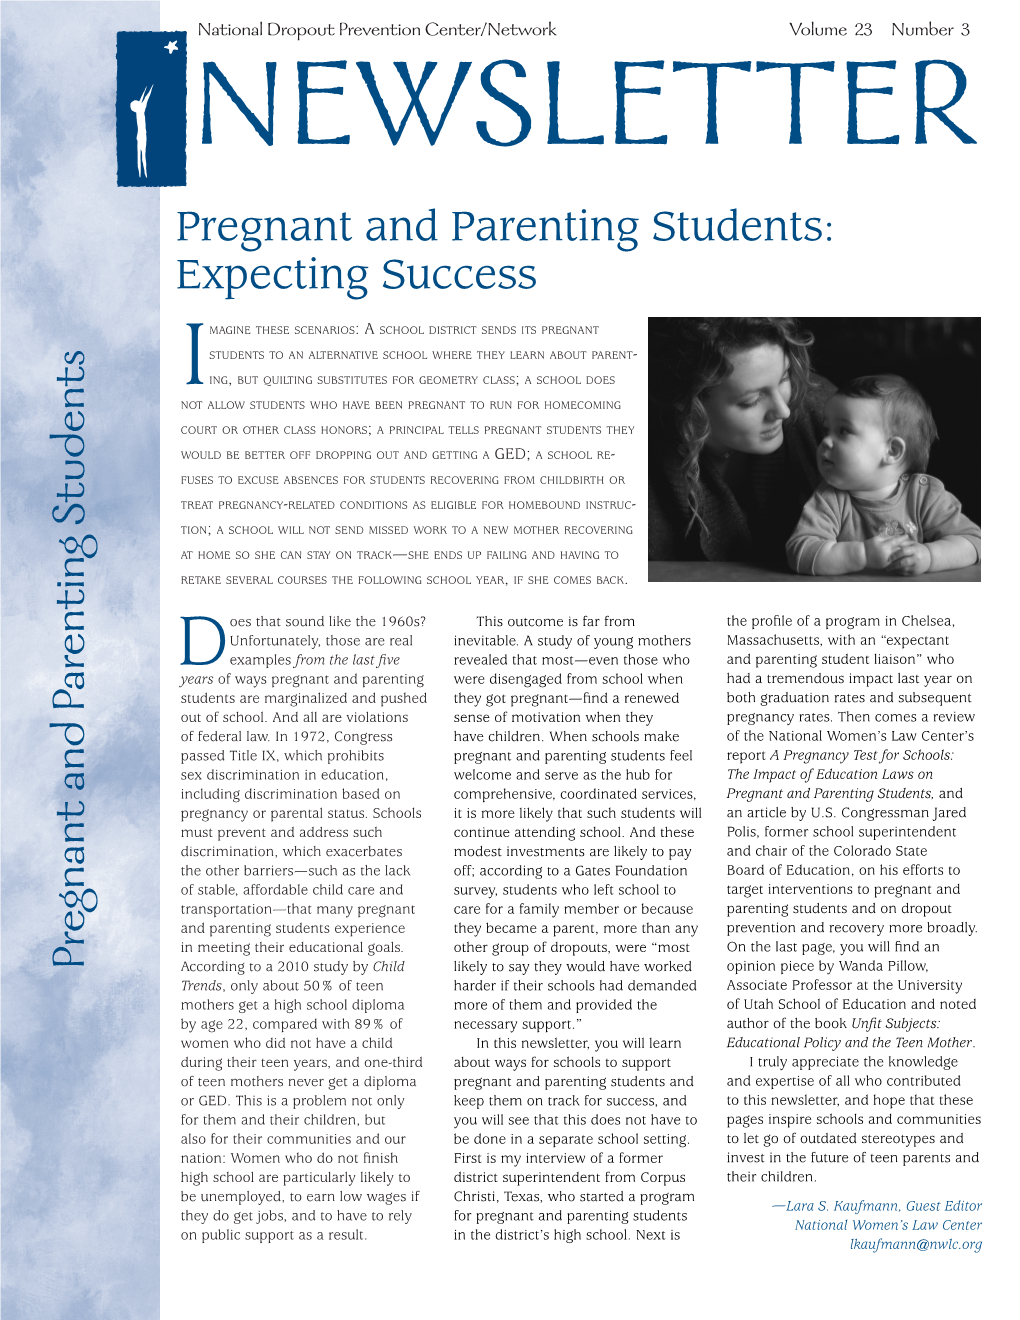 Pregnant and Parenting Students: Expecting Success